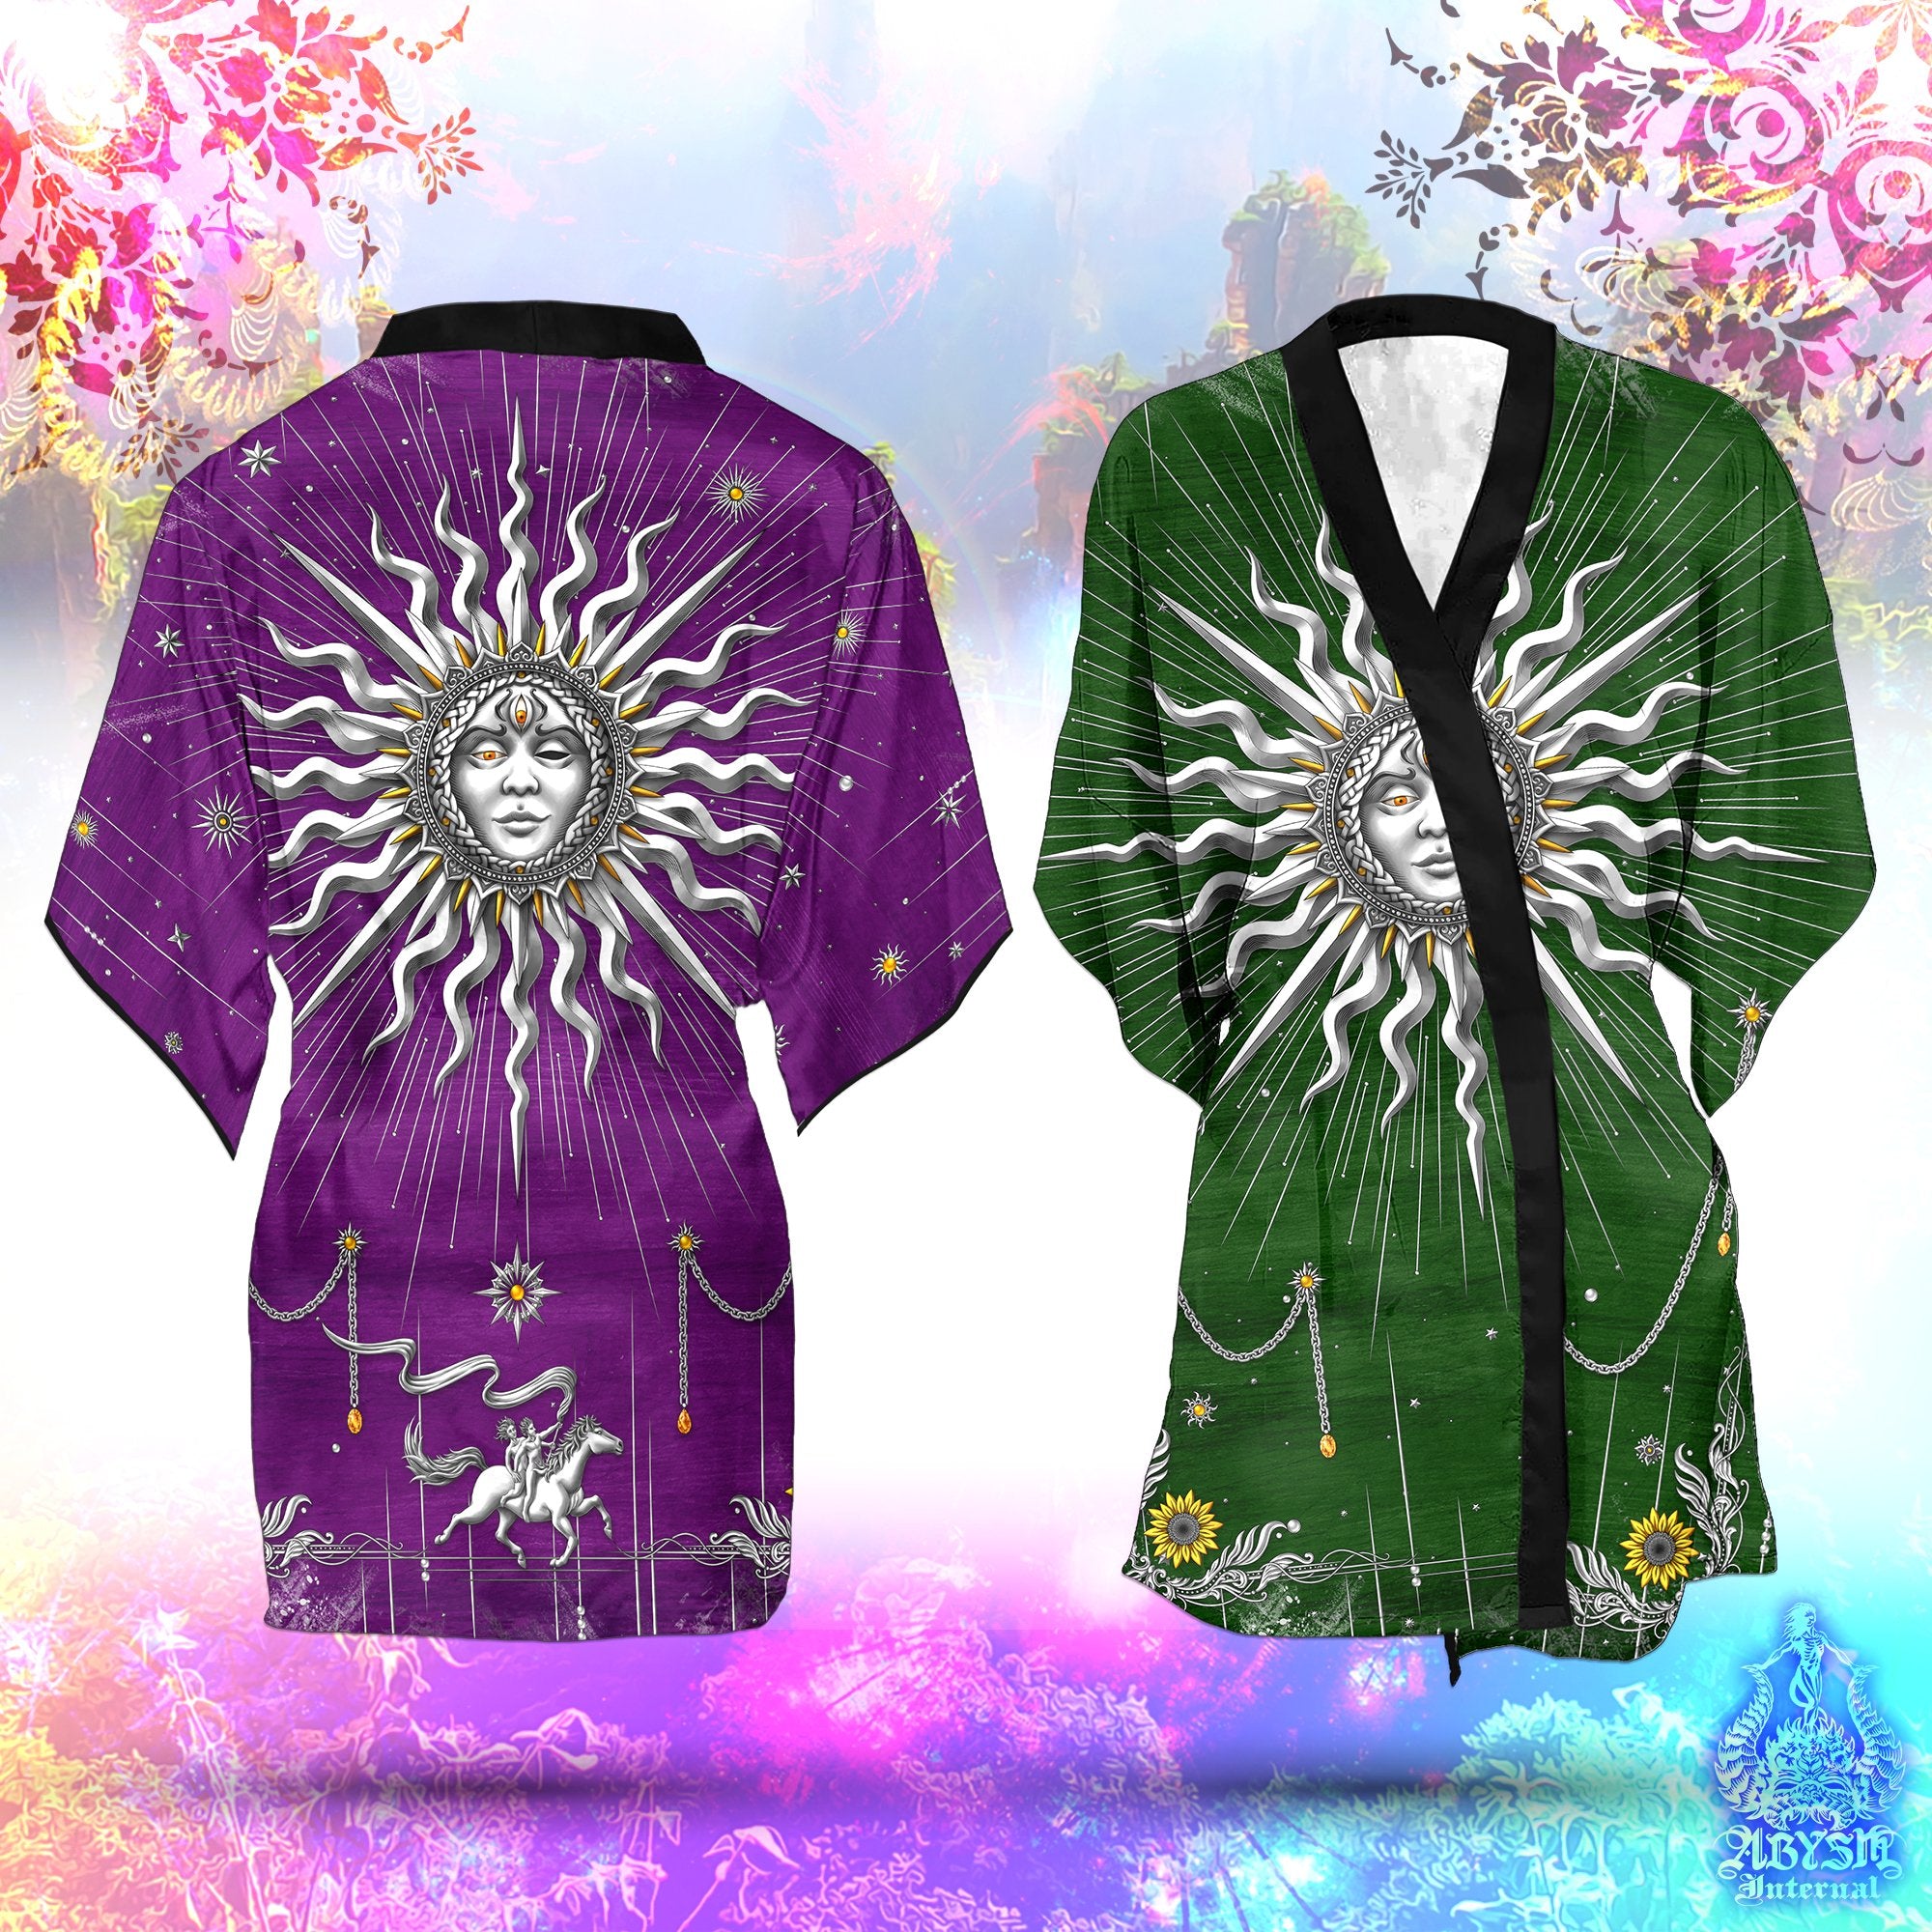 Silver Sun Short Kimono Robe, Colorful Beach Party Outfit, Tarot Arcana Coverup, Boho Summer Festival, Indie Clothing, Unisex - 7 Colors - Abysm Internal